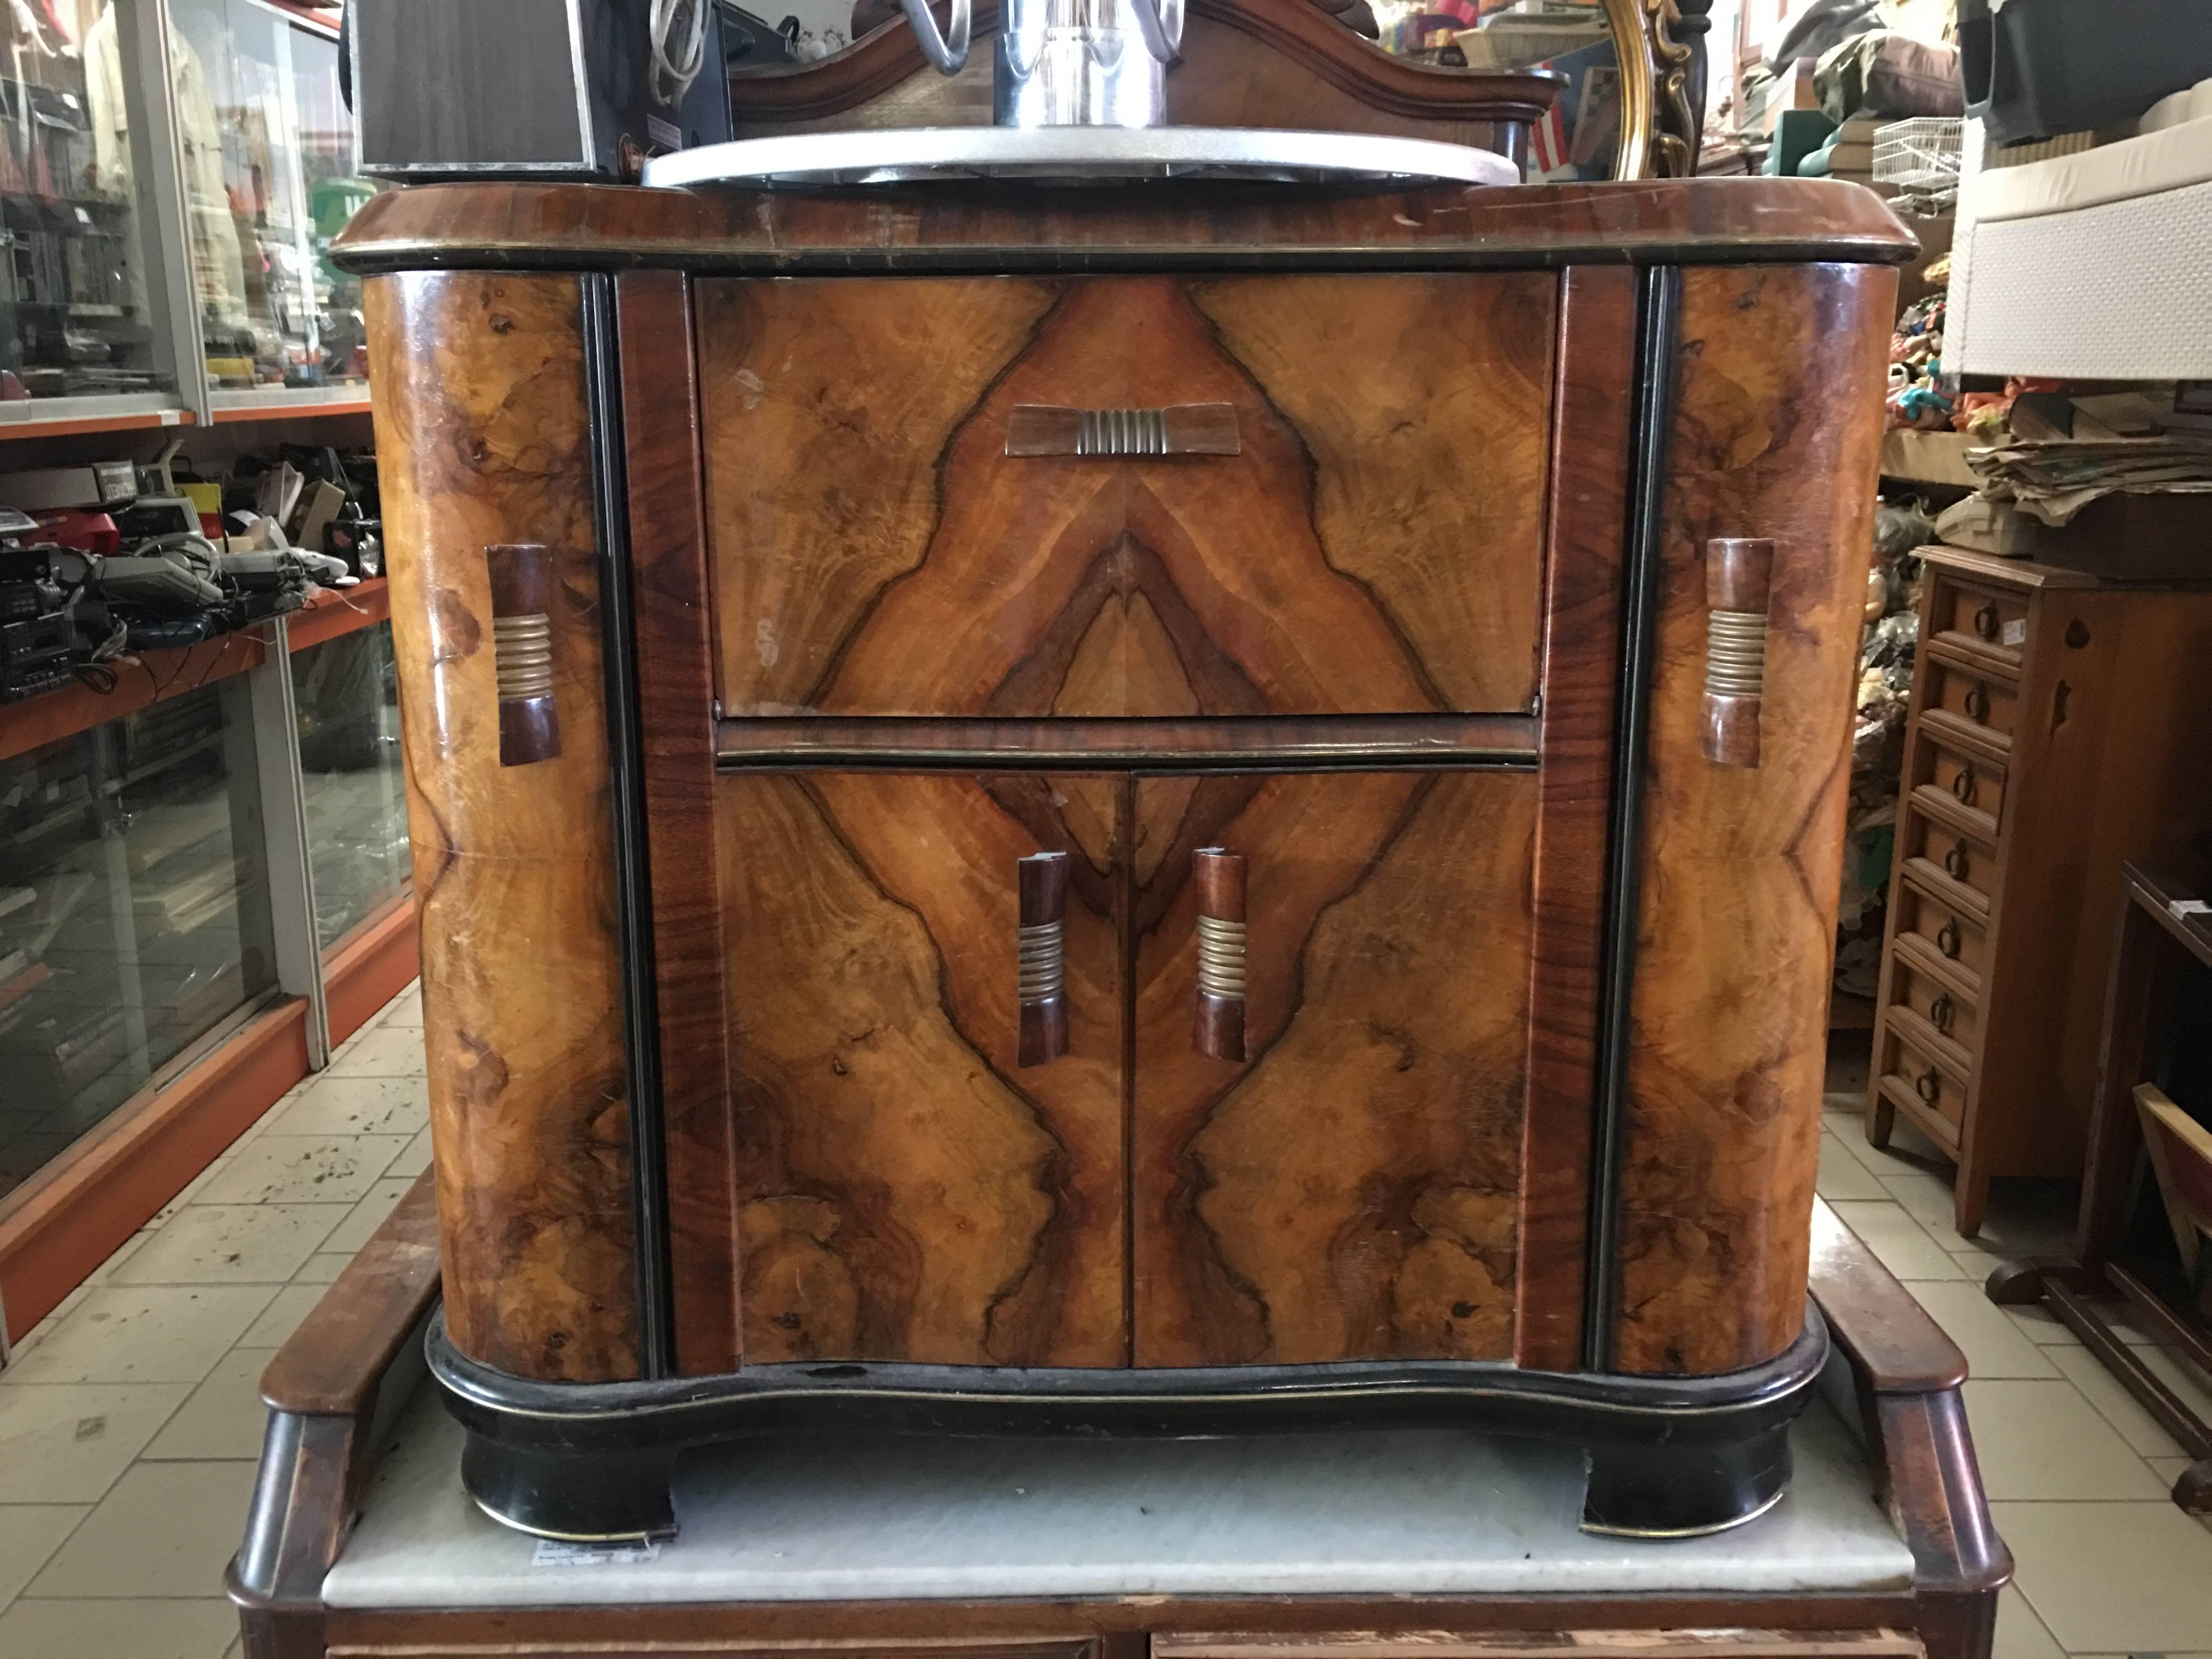 Unique Italian "Sarti" Art Deco burl wood bar with glass and place for a record player
The inside has storage facilities and is beautifully decorated with glass.
Nice round shapes are used on all elements of this wonderful bar! The record